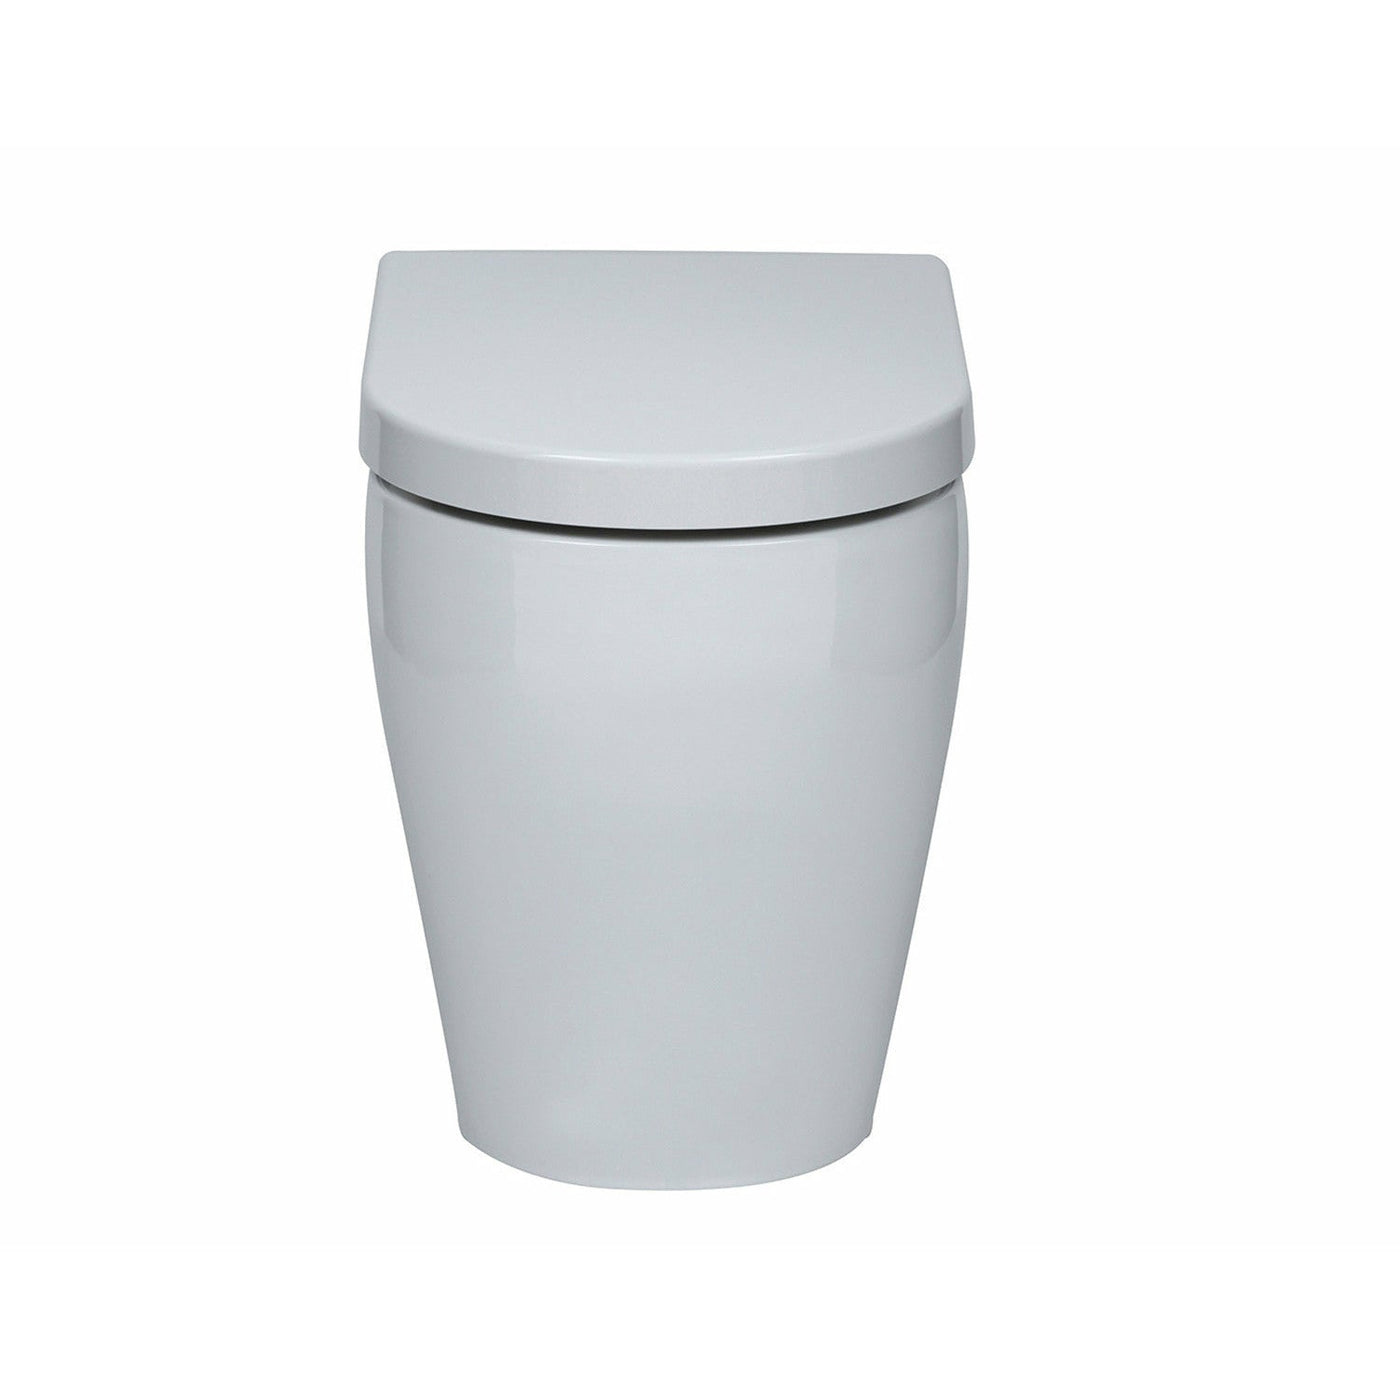 Frontline Emme Back-to-Wall Toilet with Soft-Close Seat - Letta London - 